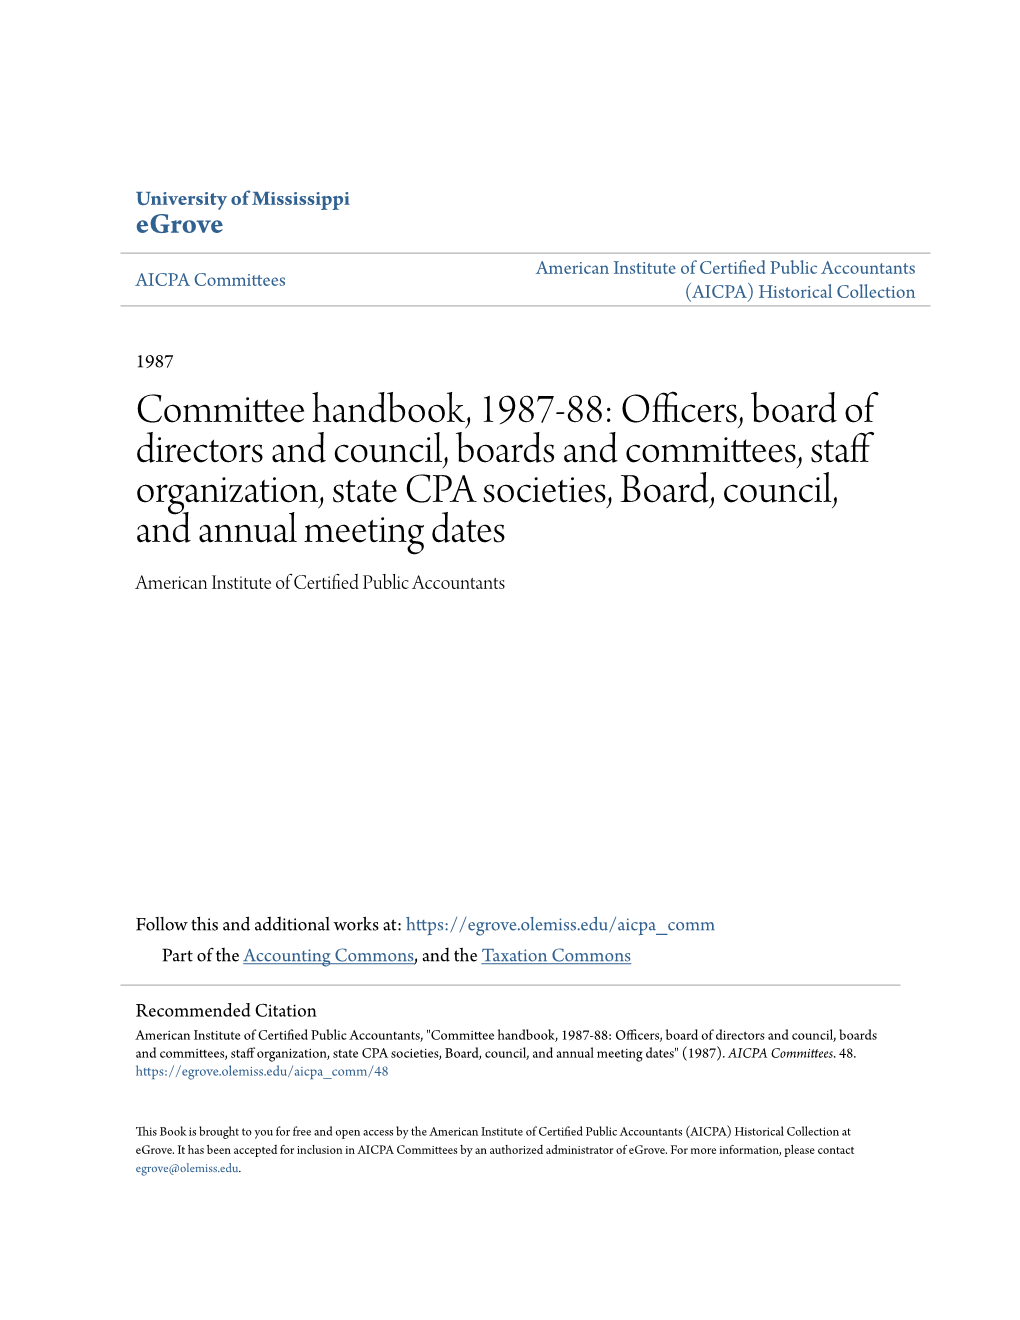 Committee Handbook, 1987-88: Officers, Board of Directors And